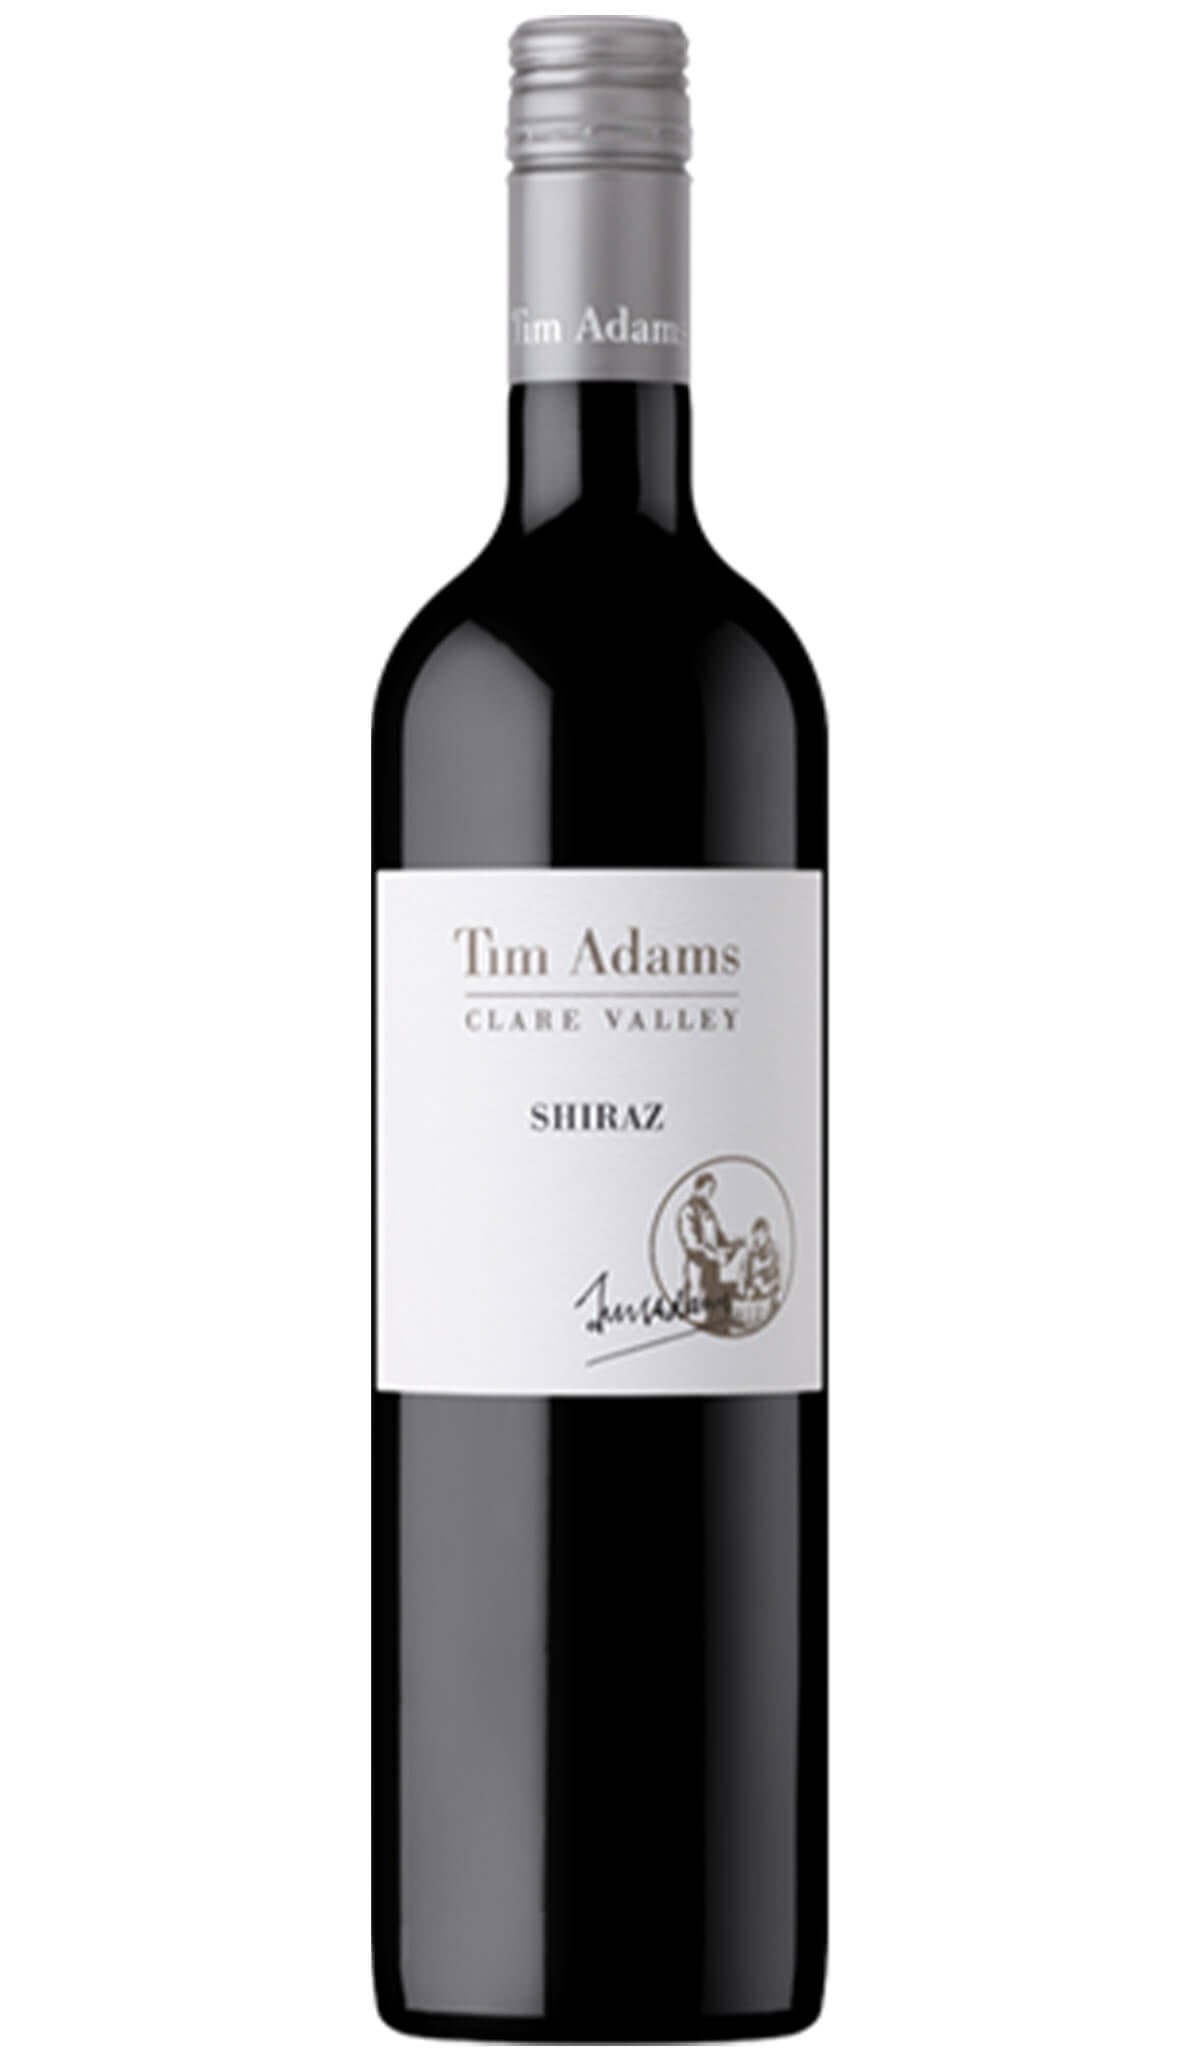 Find out more or purchase Tim Adams Shiraz 2020 (Clare Valley) online at Wine Sellers Direct - Australia's independent liquor specialists.